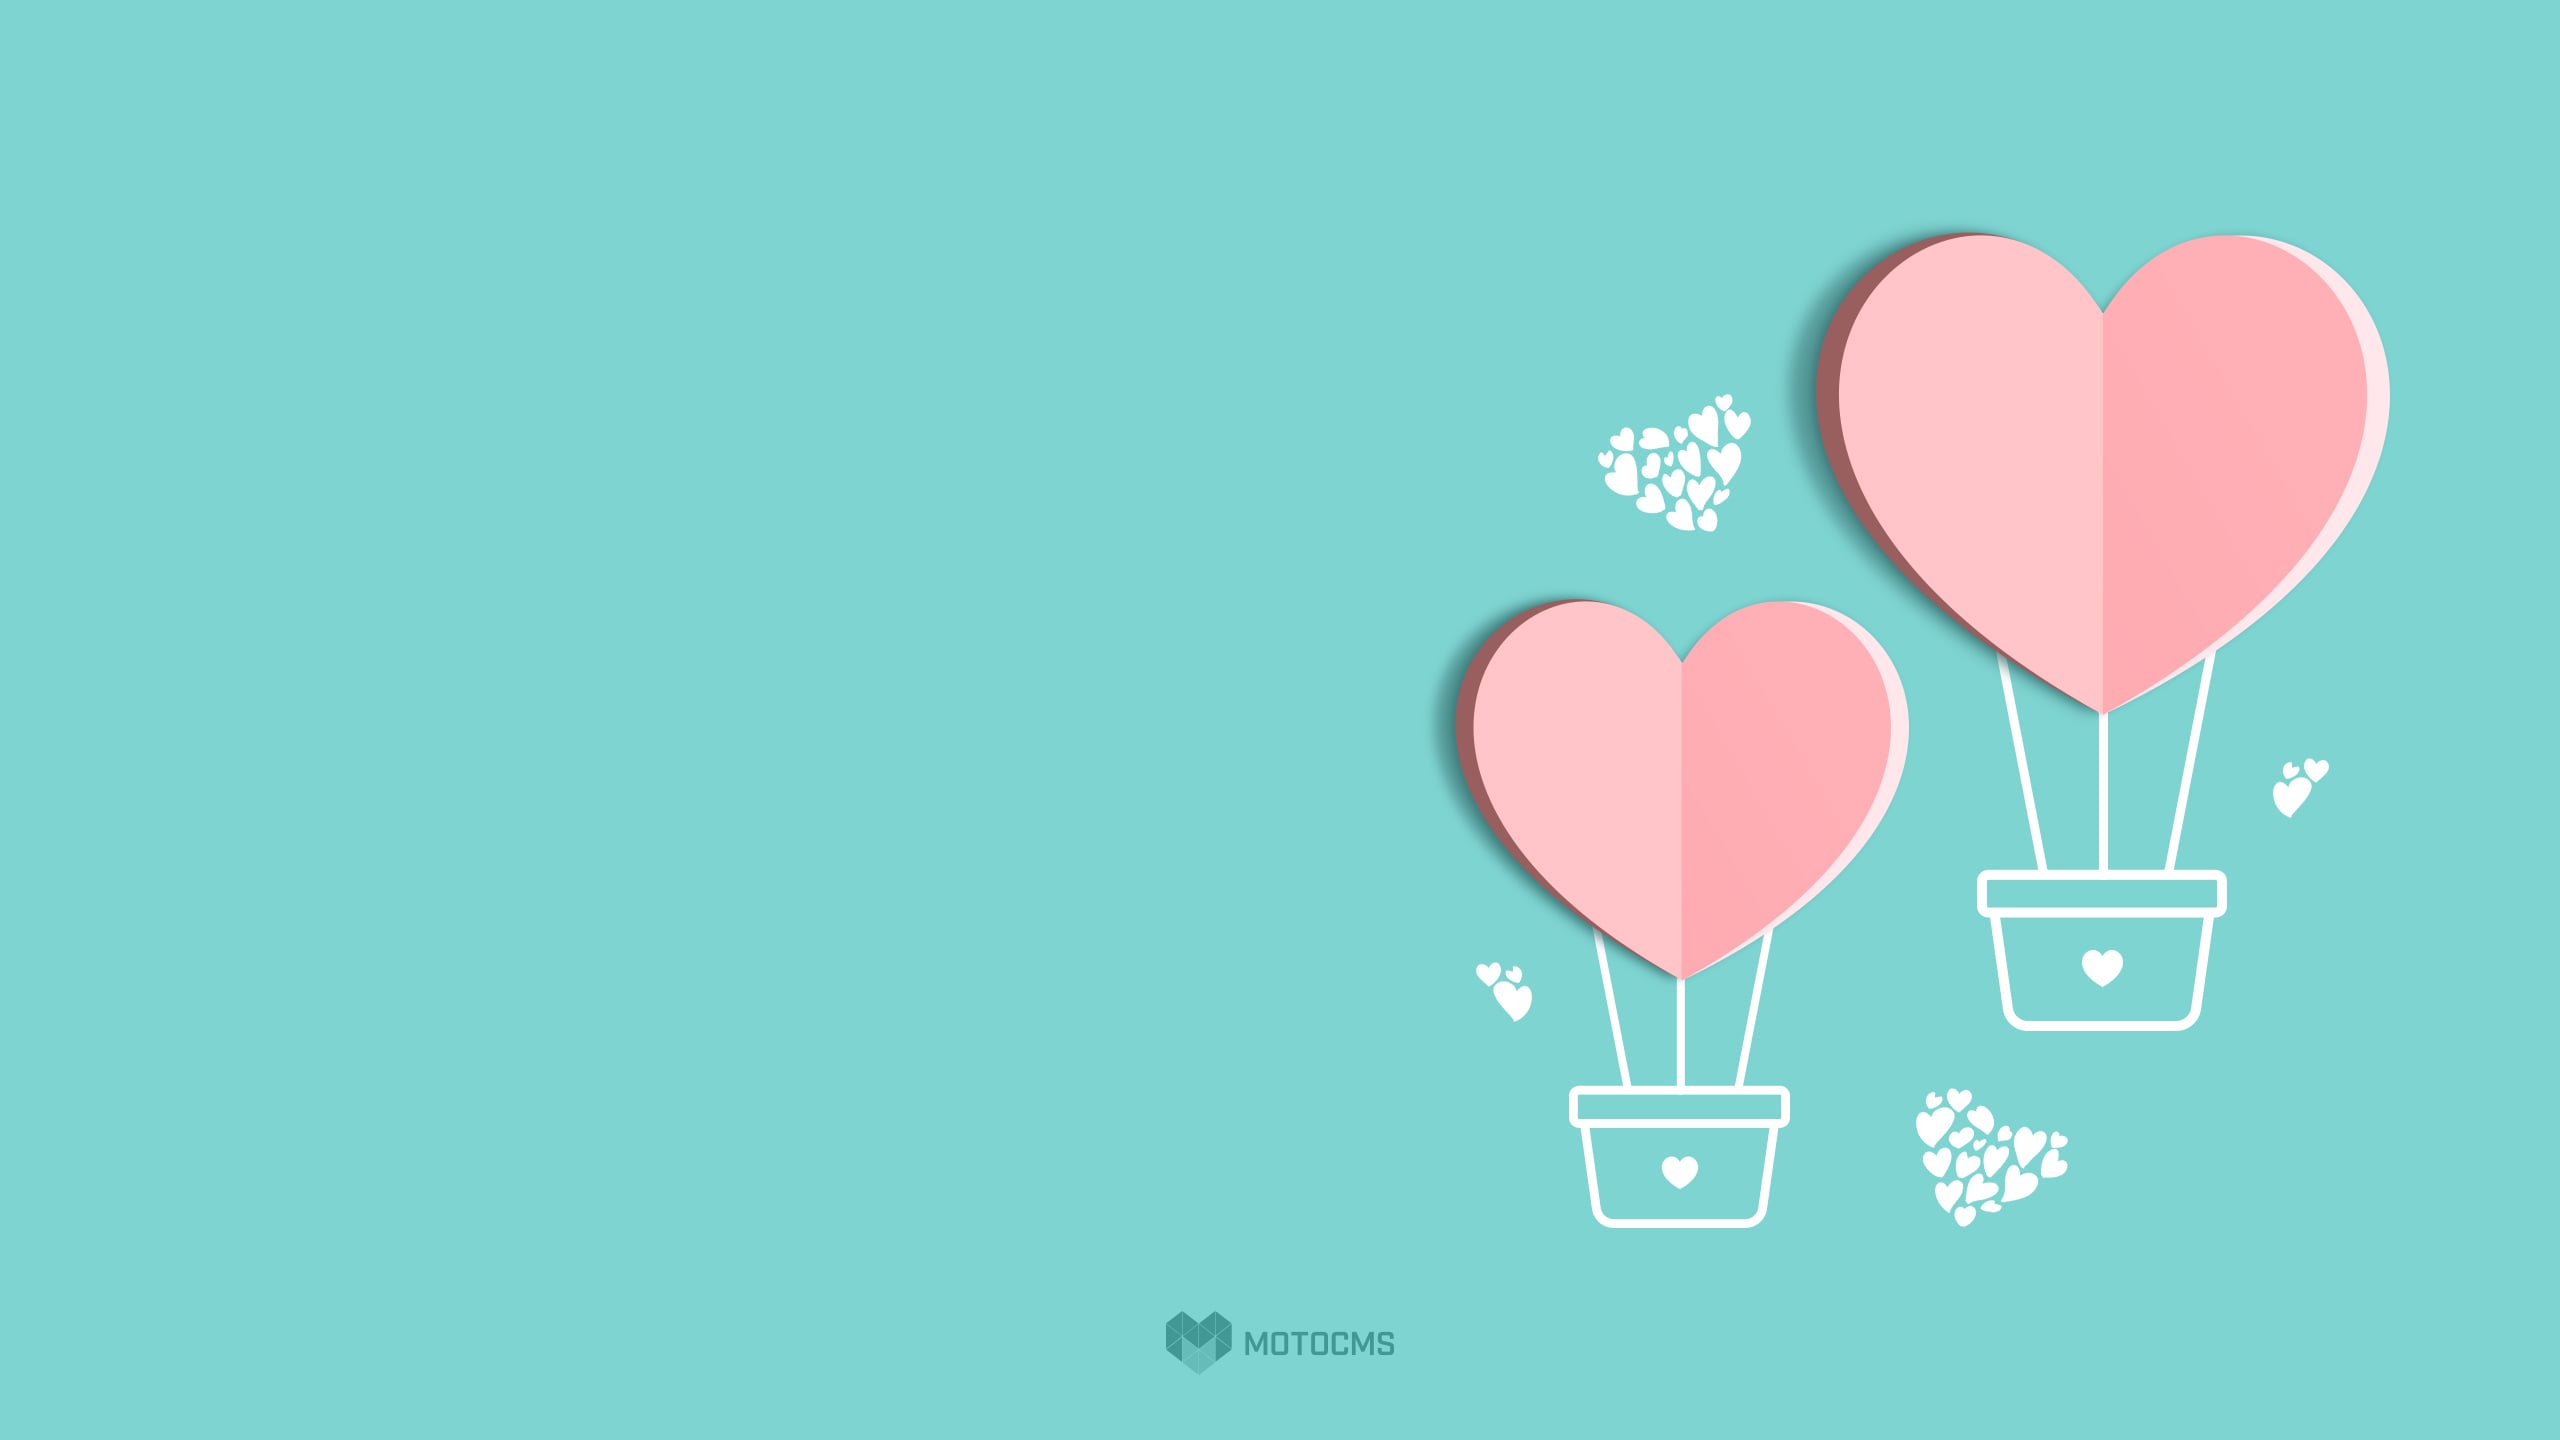 Download Free Valentine's Day Wallpapers for Your Loved One.